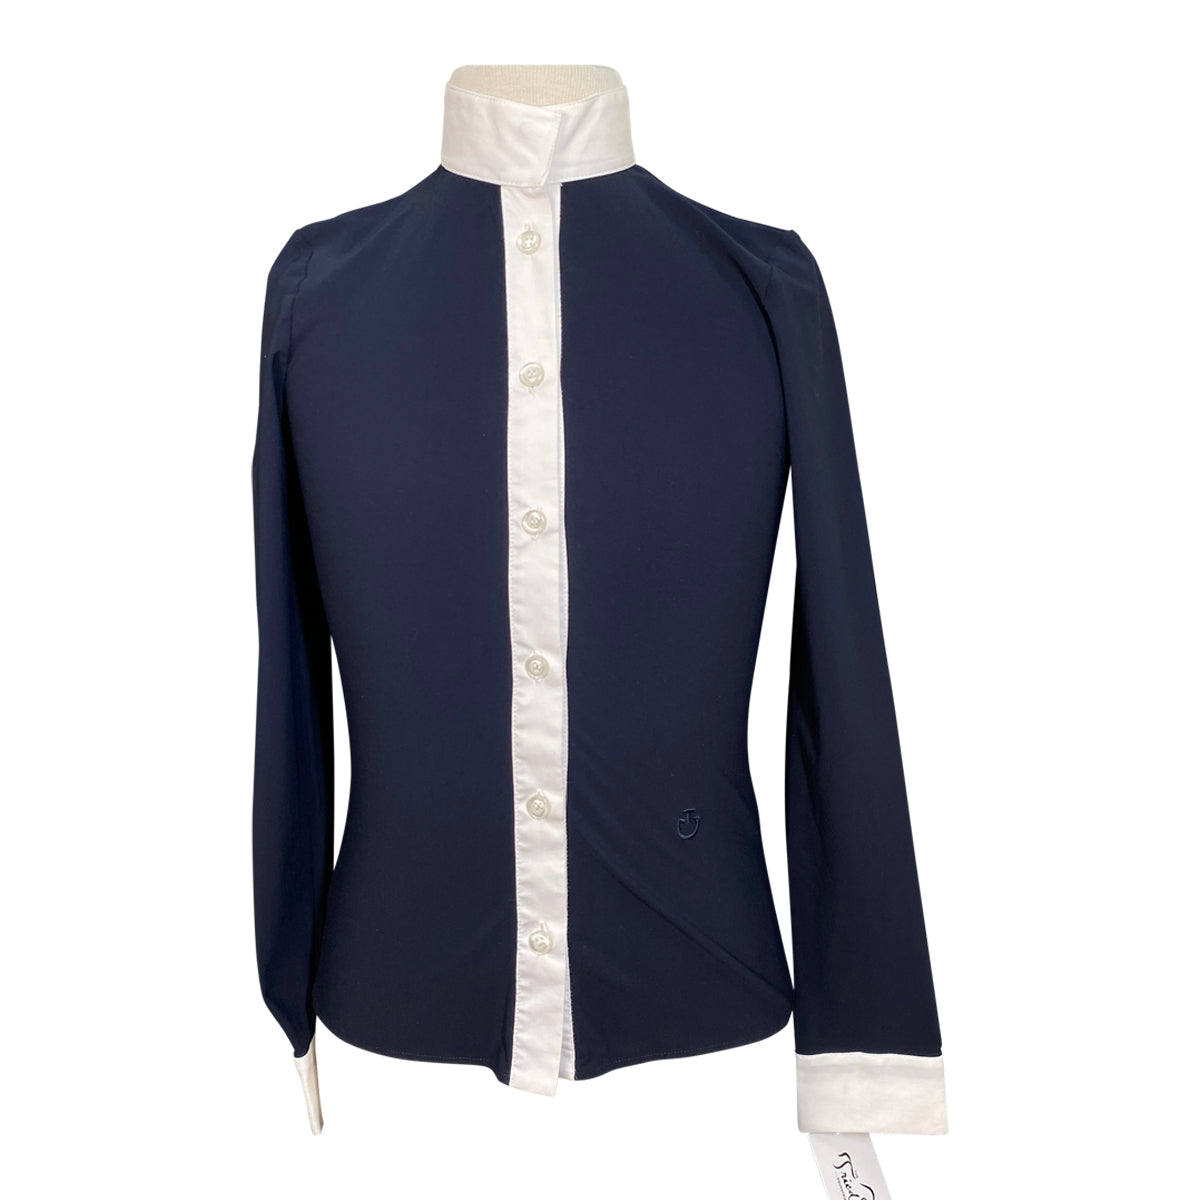 Cavalleria Toscana Long Sleeve Competition Shirt in Navy